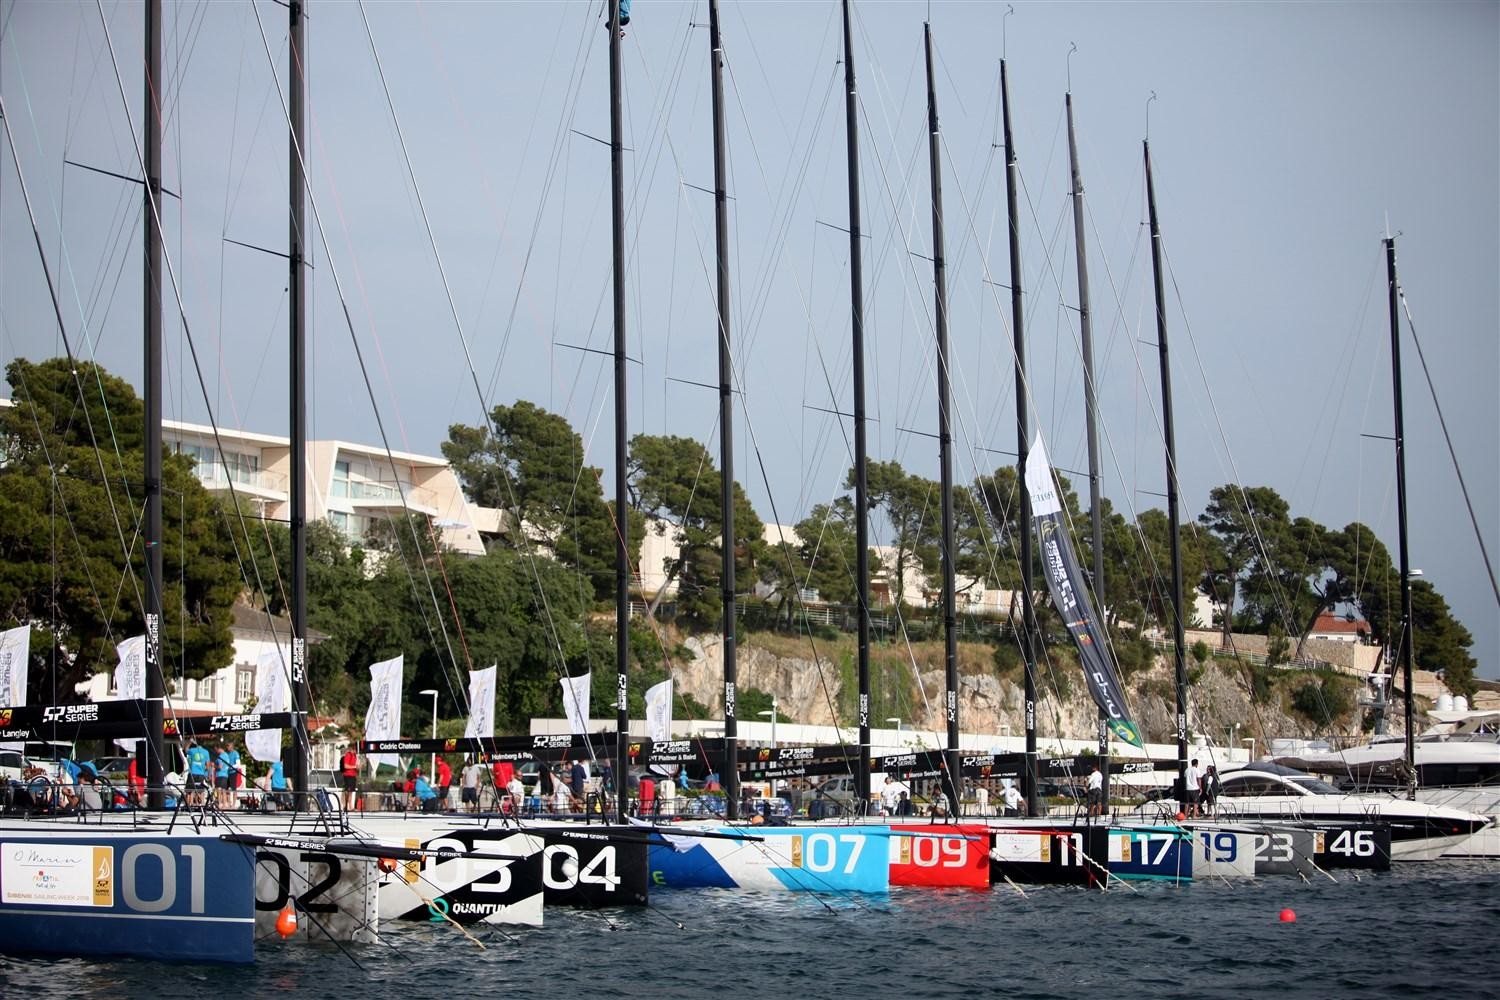 Doug DeVos’s Quantum Racing team clinched top honours at the first event of the highly anticipated 2018 52 SUPER SERIES on Croatia’s Dalmatian Coast